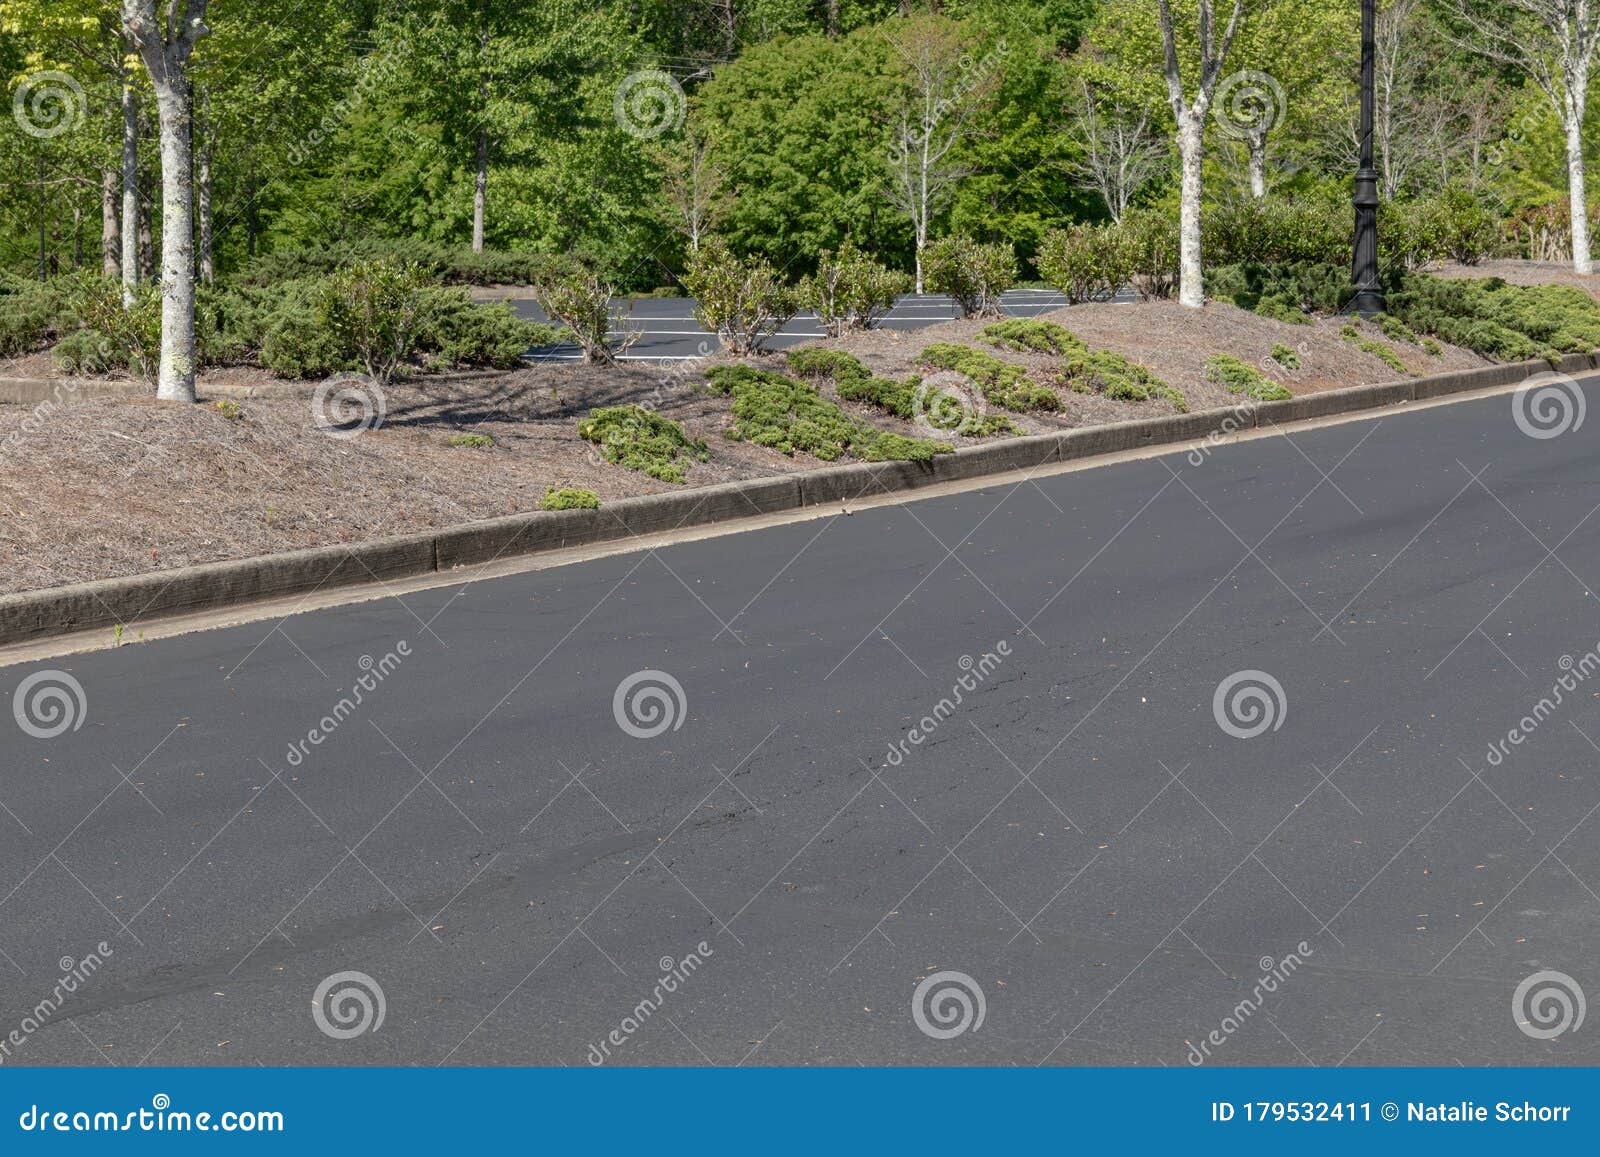 roadway by parking lot, asphalt with formed concrete curb, trees and bushes landscaping